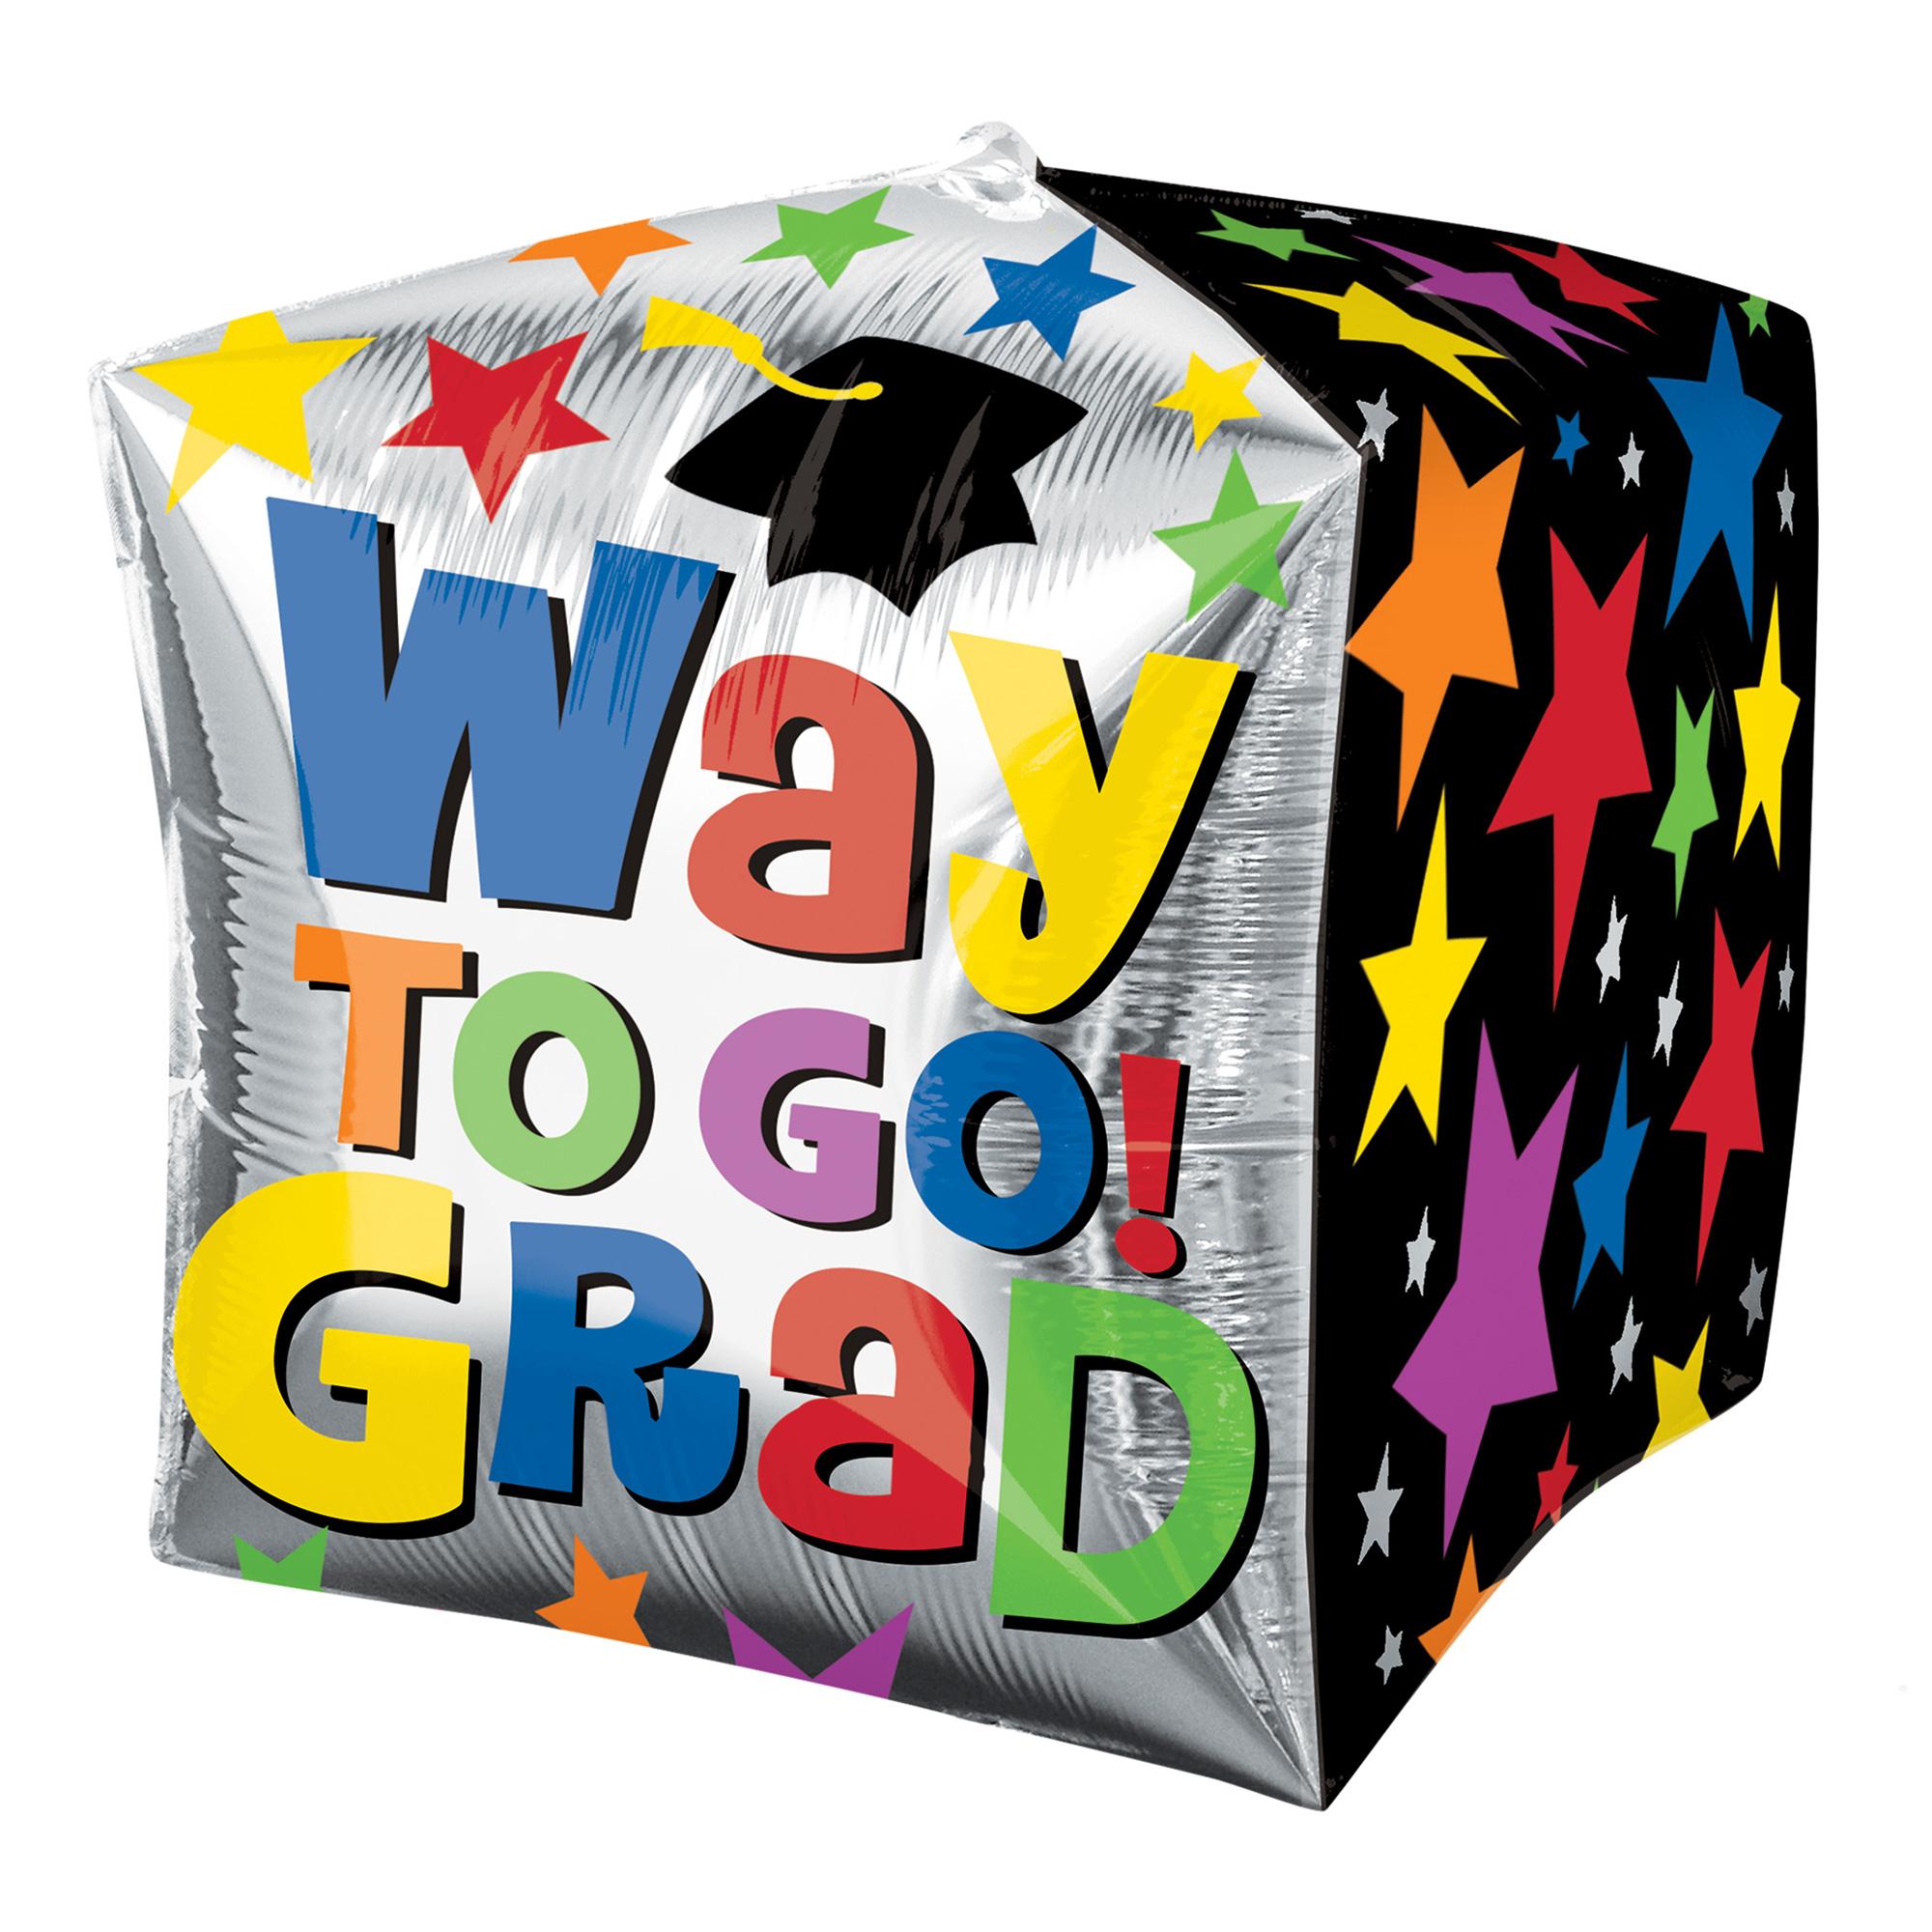 Way to Go Grad Stars Cubez Foil Balloon 15in Balloons & Streamers - Party Centre - Party Centre